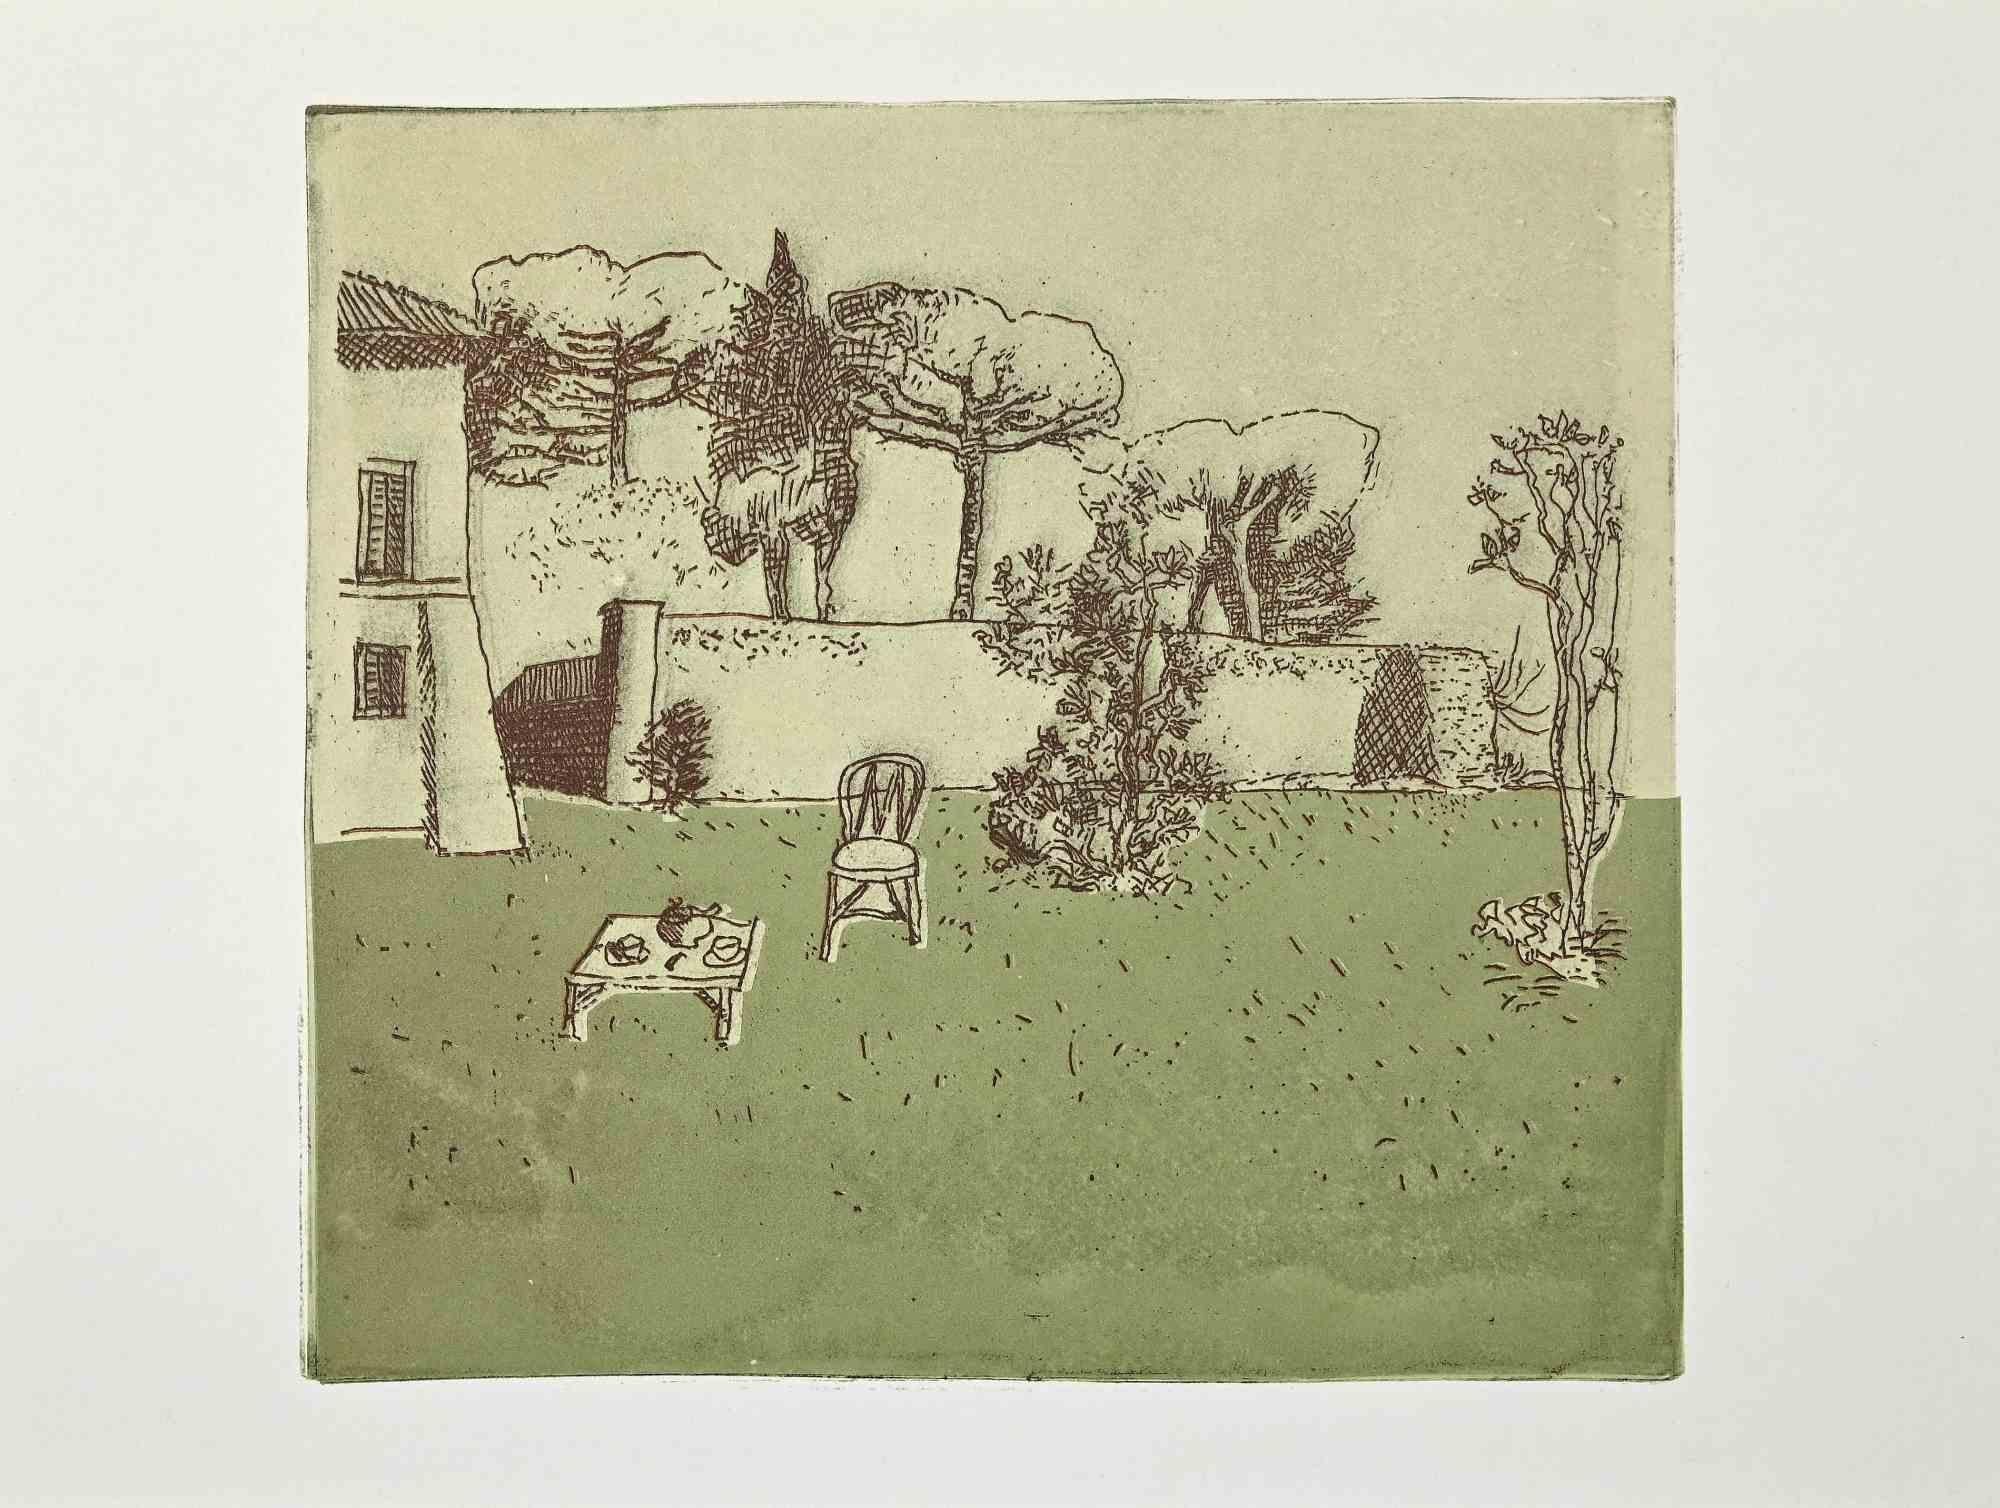 Landscape is a vintage Offset Print on ivory-colored paper, realized by Franco Gentilini ( Italian Painter, 1909-1981), in the 1970s.

The state of preservation of the artwork is excellent.

Franco Gentilini ( Italian Painter, 1909-1981):